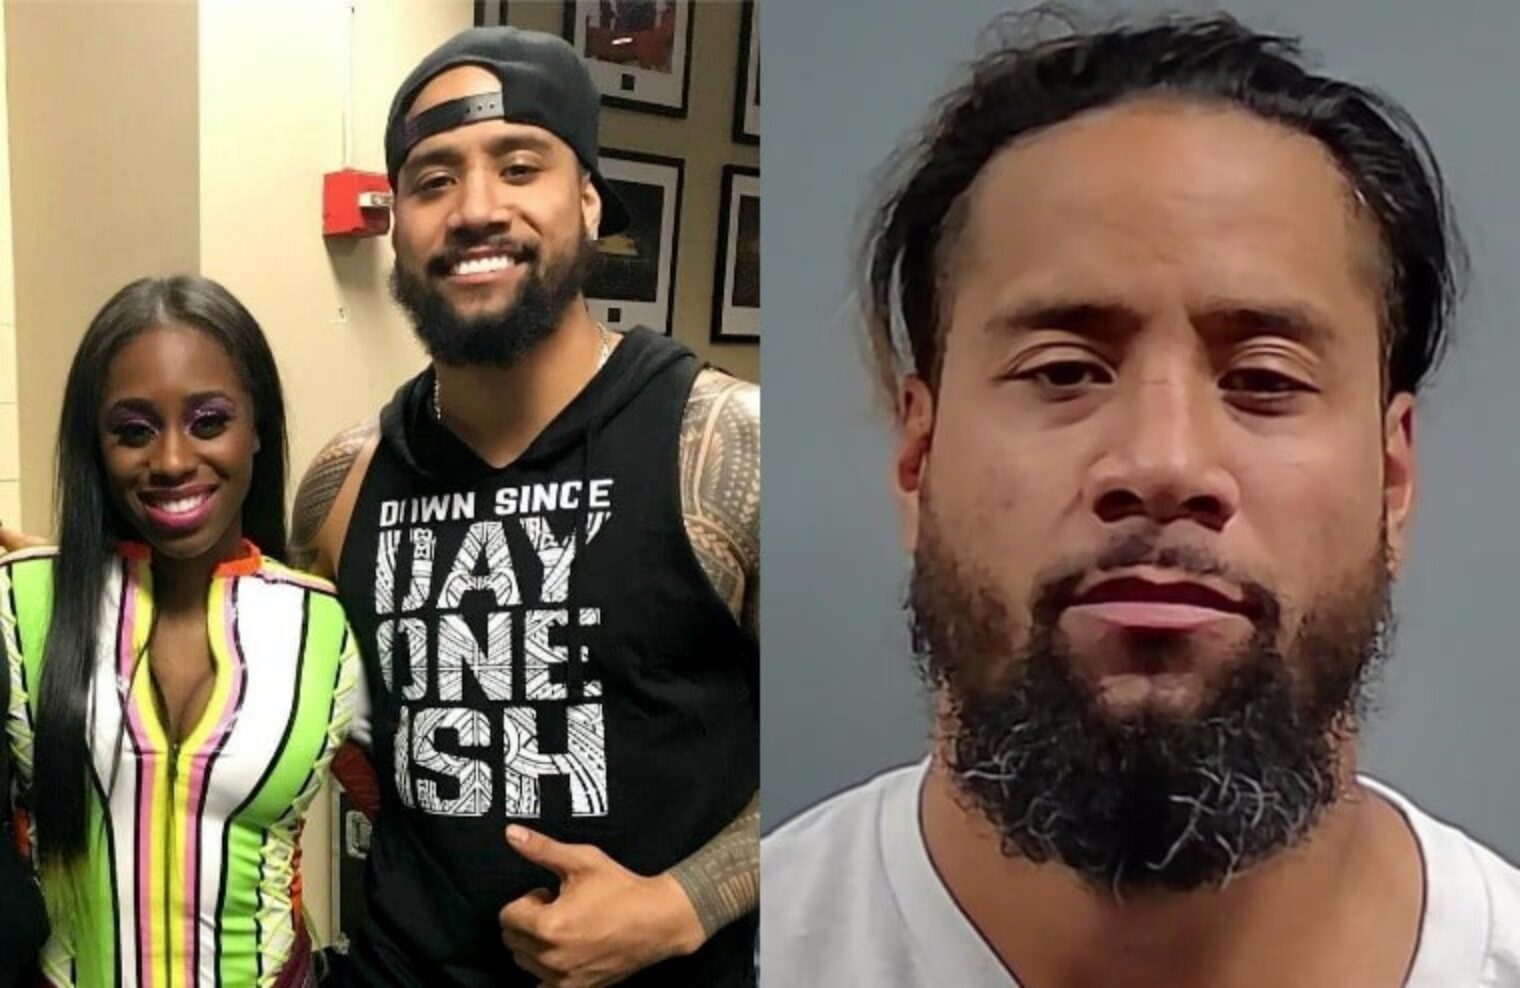 WWE’s Jimmy Uso Arrested Again For DUI WEB IS JERICHO